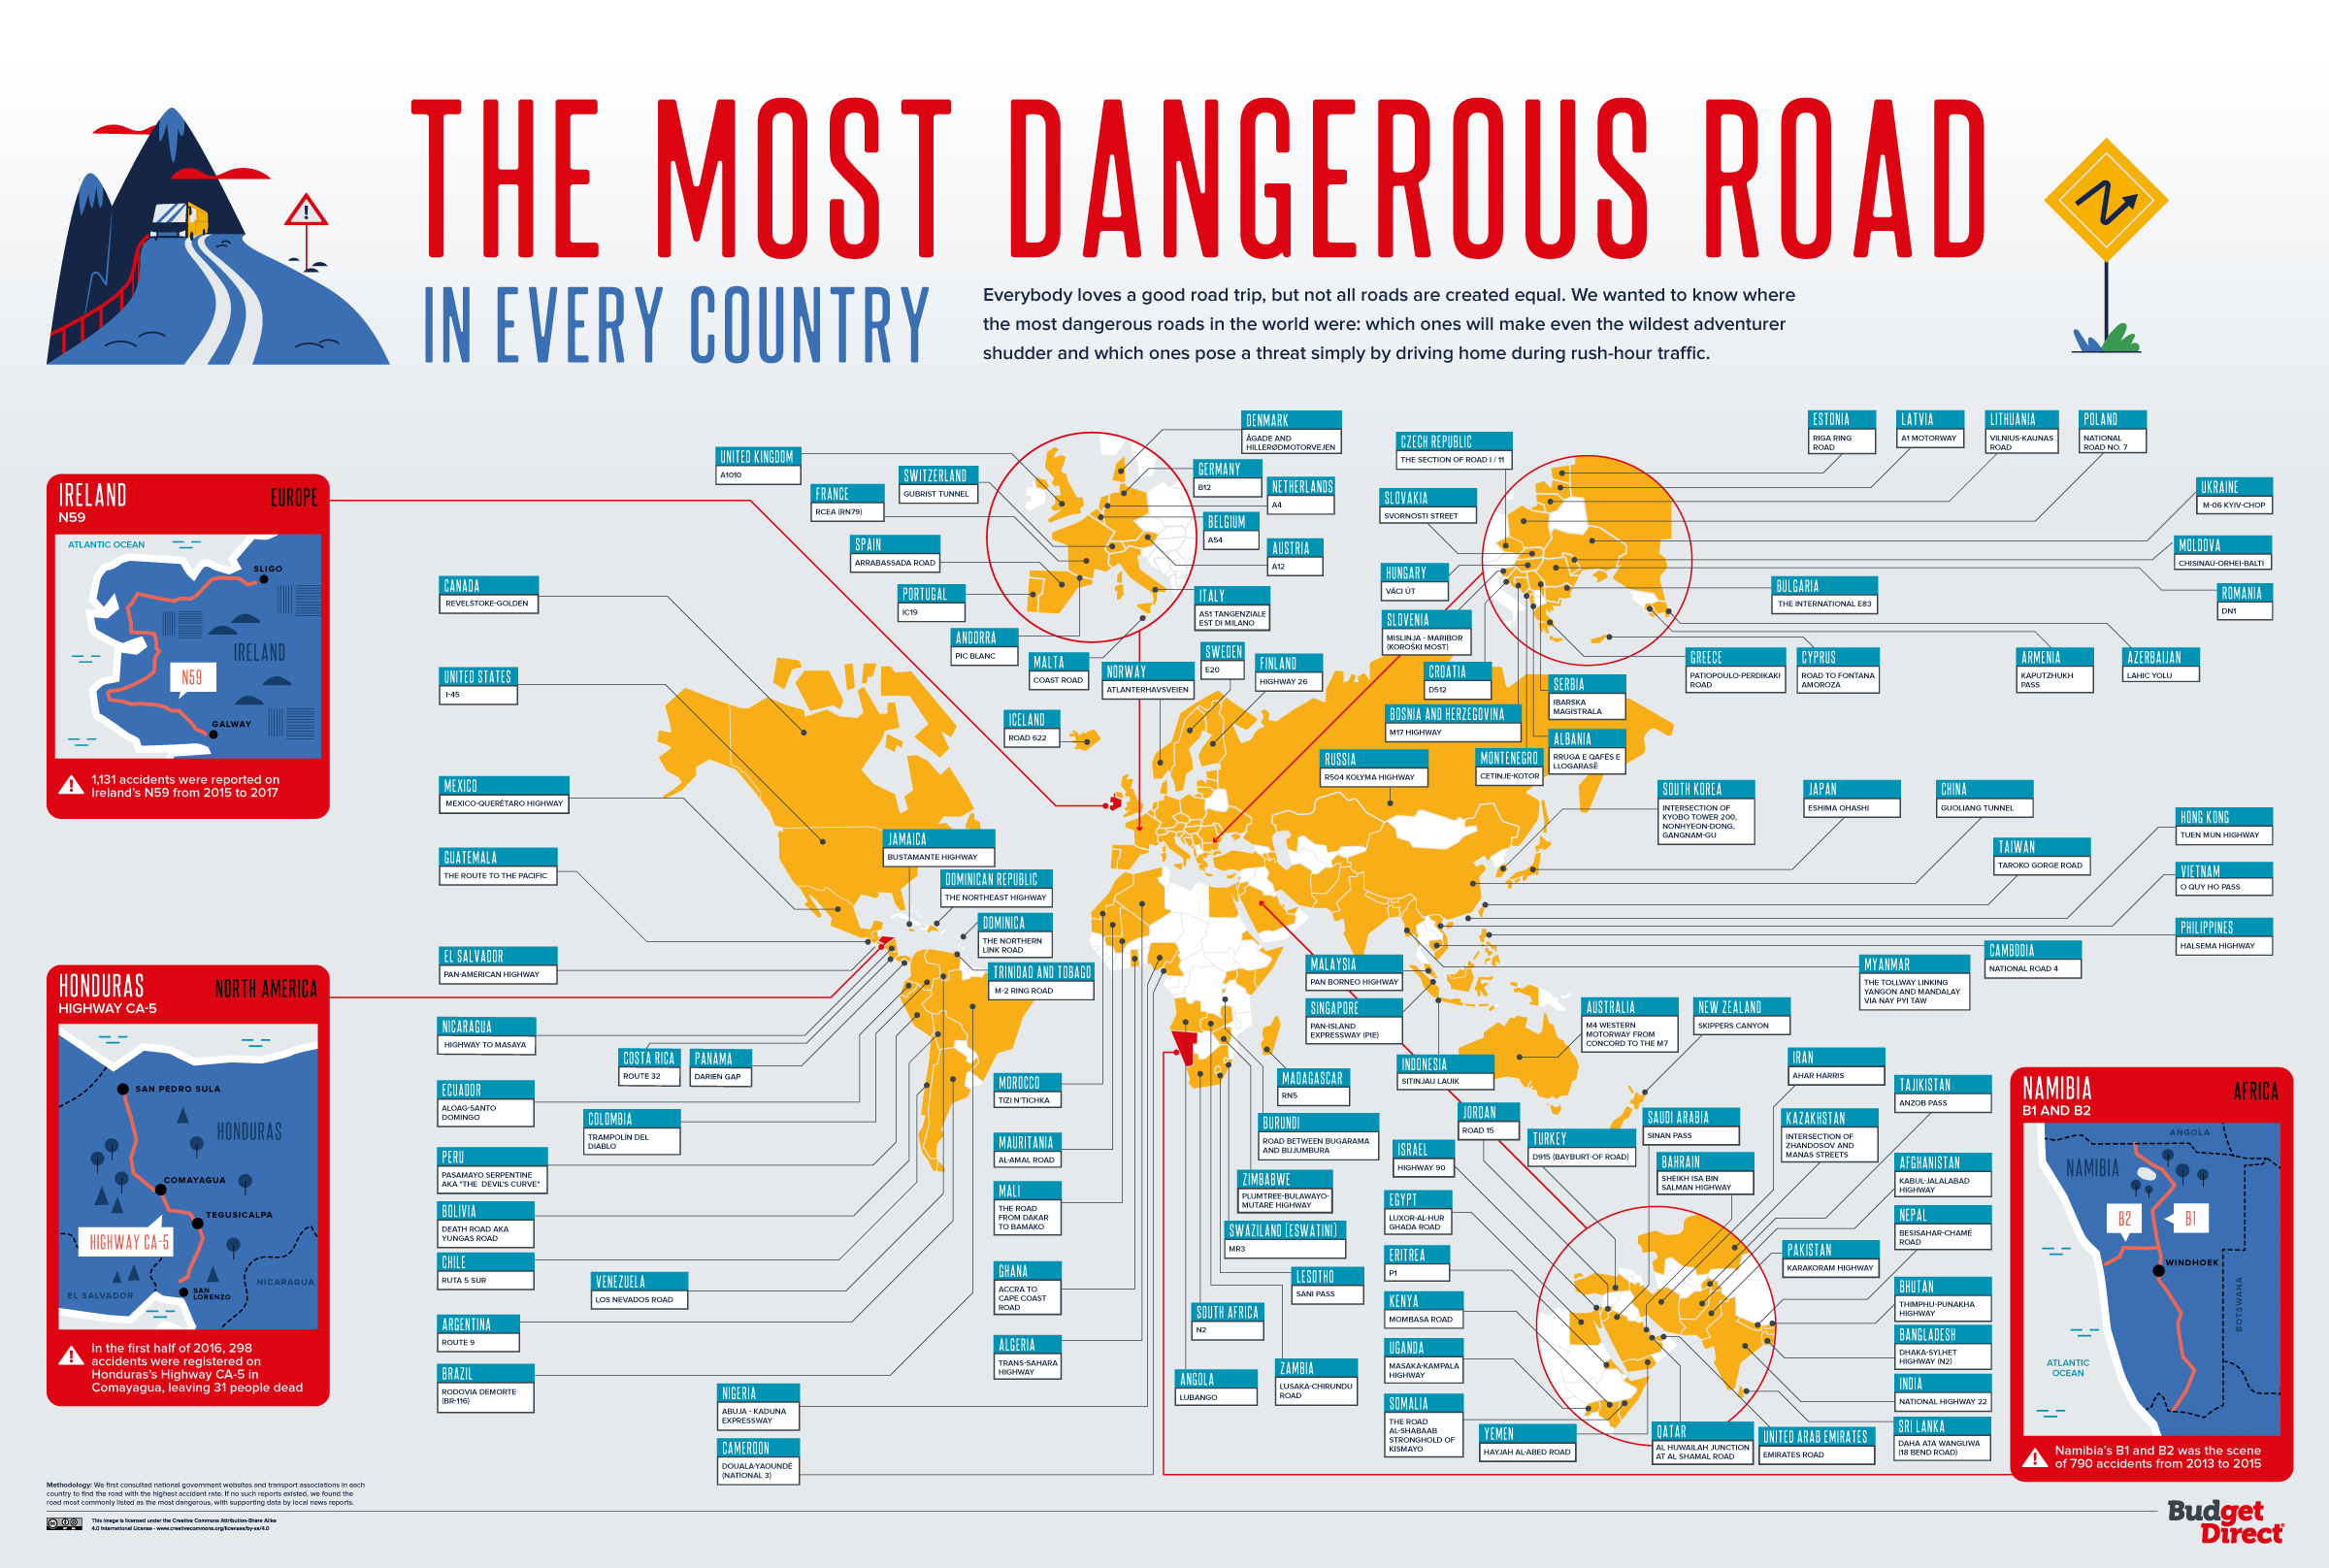 The most dangerous roads in every country